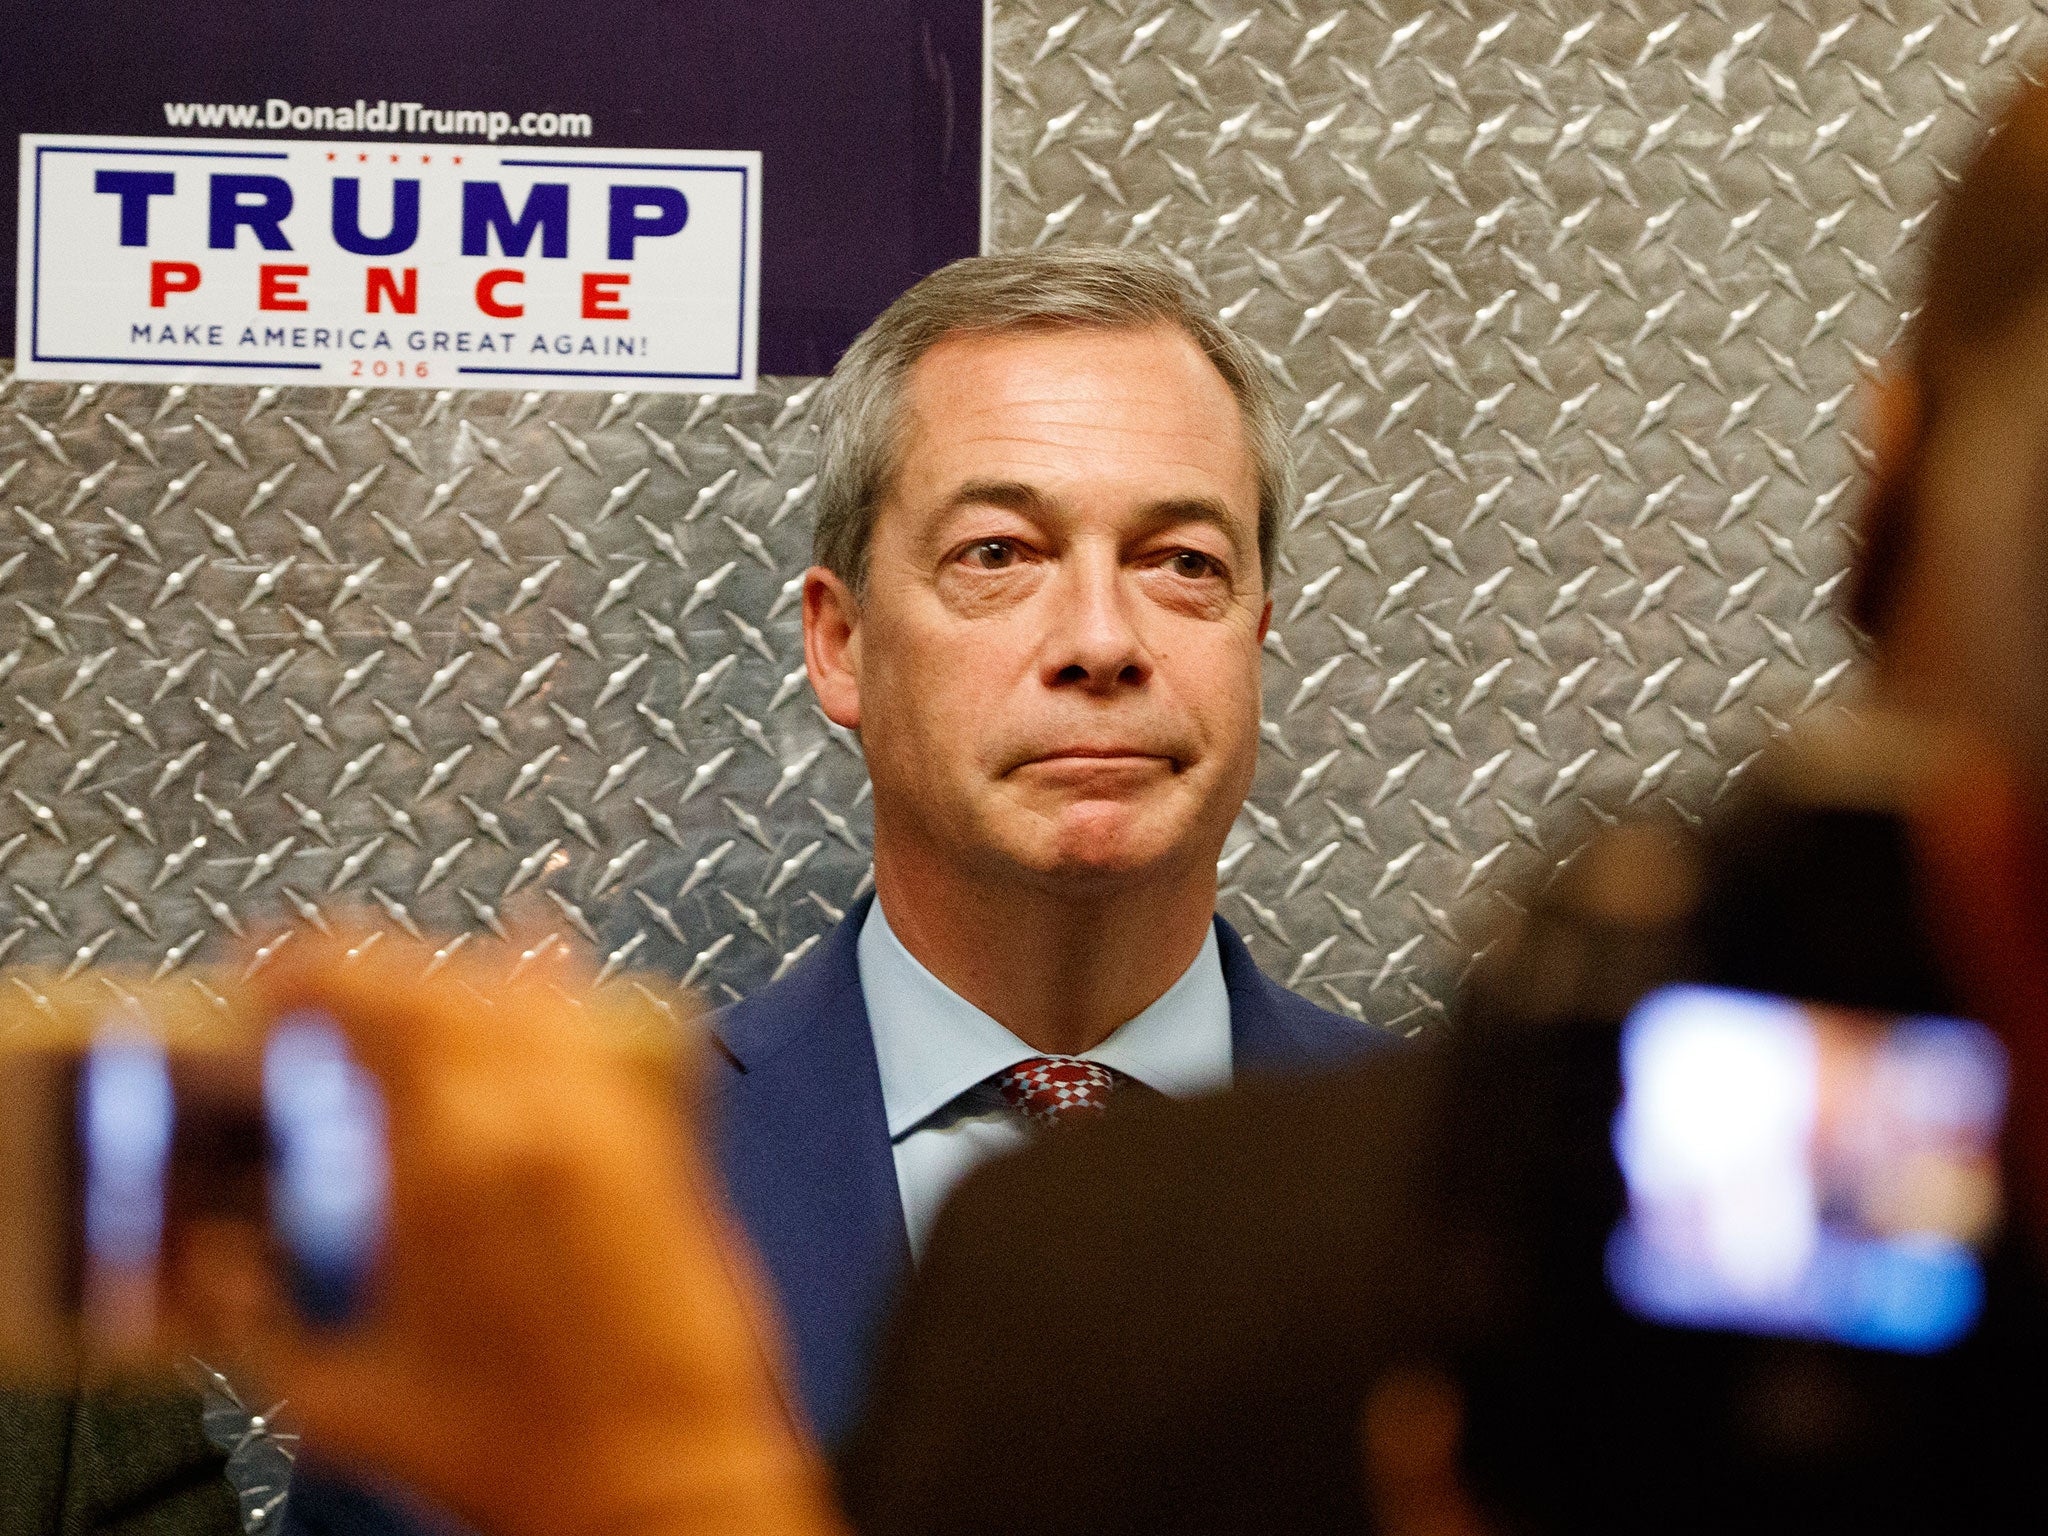 Nigel Farage arriving for meeting at Trump Tower in New York on 12 November